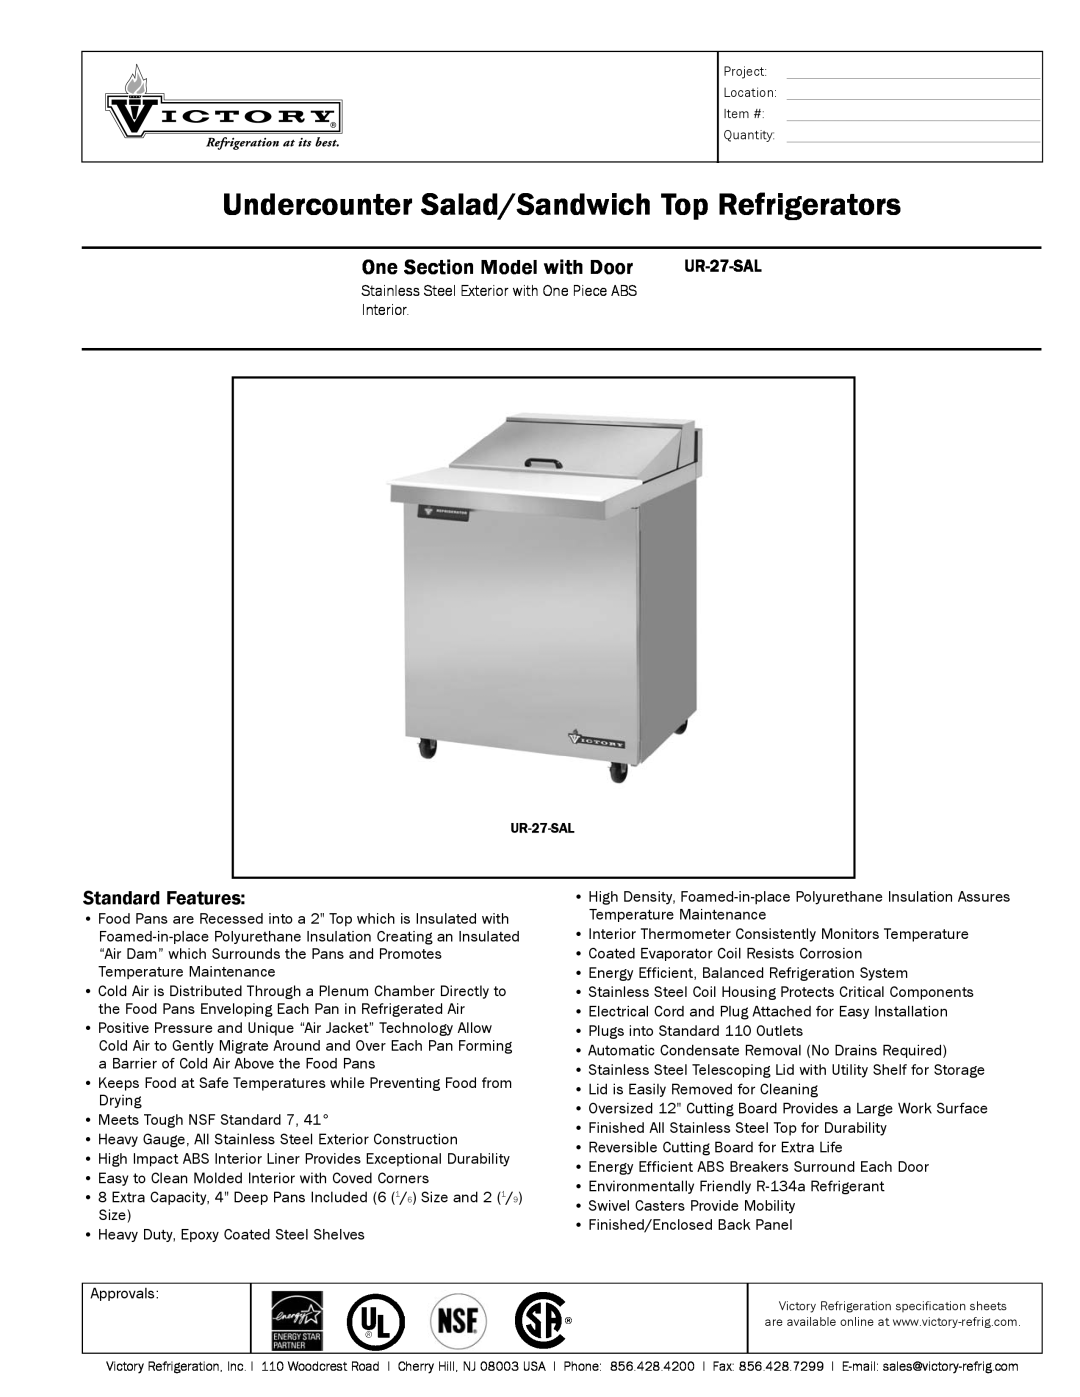 Victory Refrigeration UR-27-SAL specifications Undercounter Salad/Sandwich Top Refrigerators, One Section Model with Door 